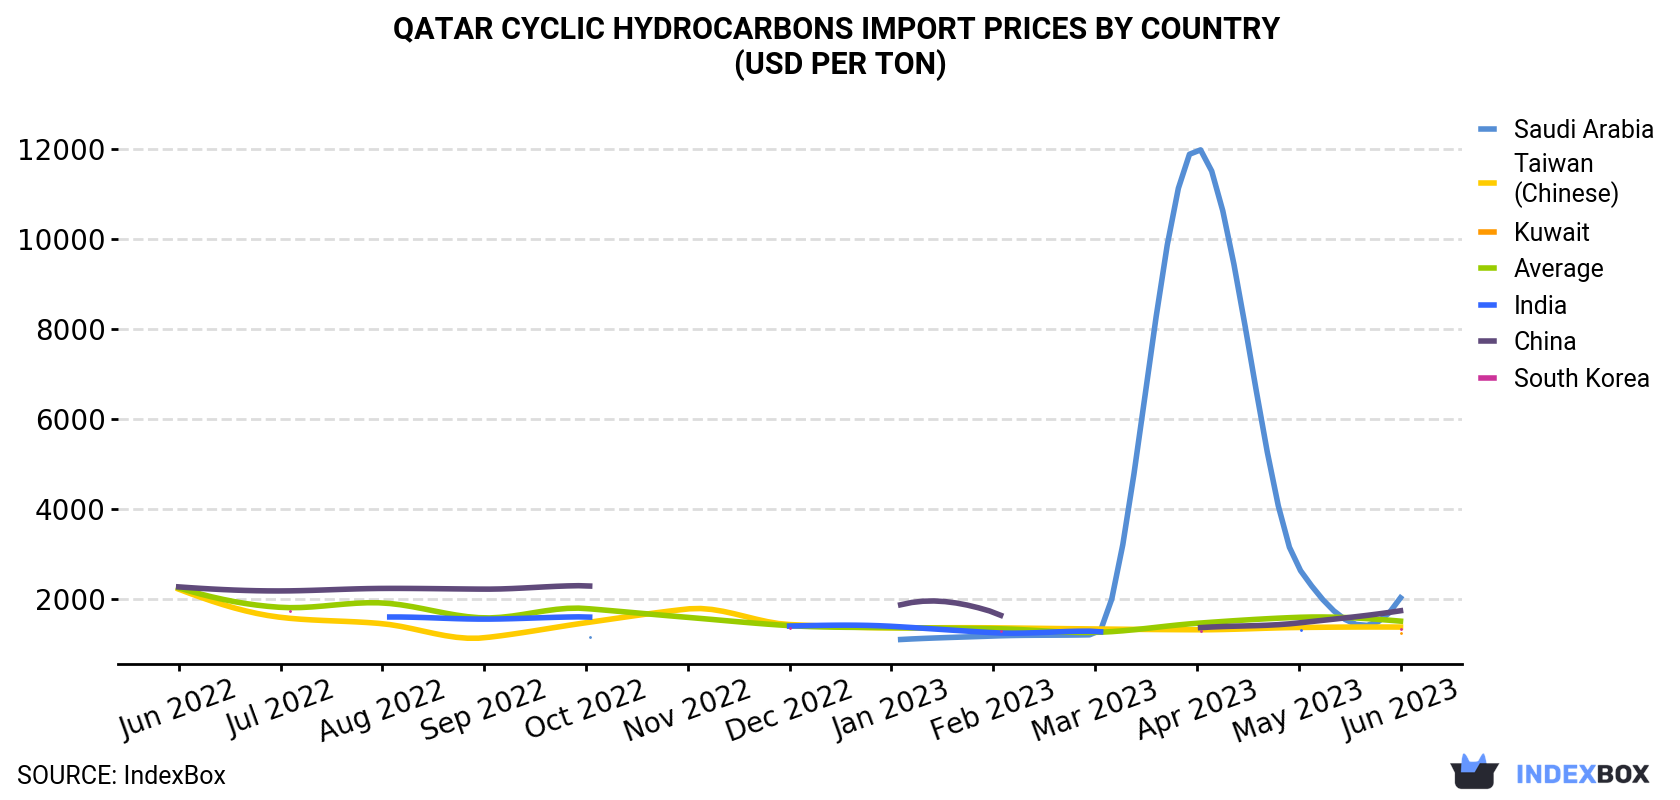 Qatar Cyclic Hydrocarbons Import Prices By Country (USD Per Ton)